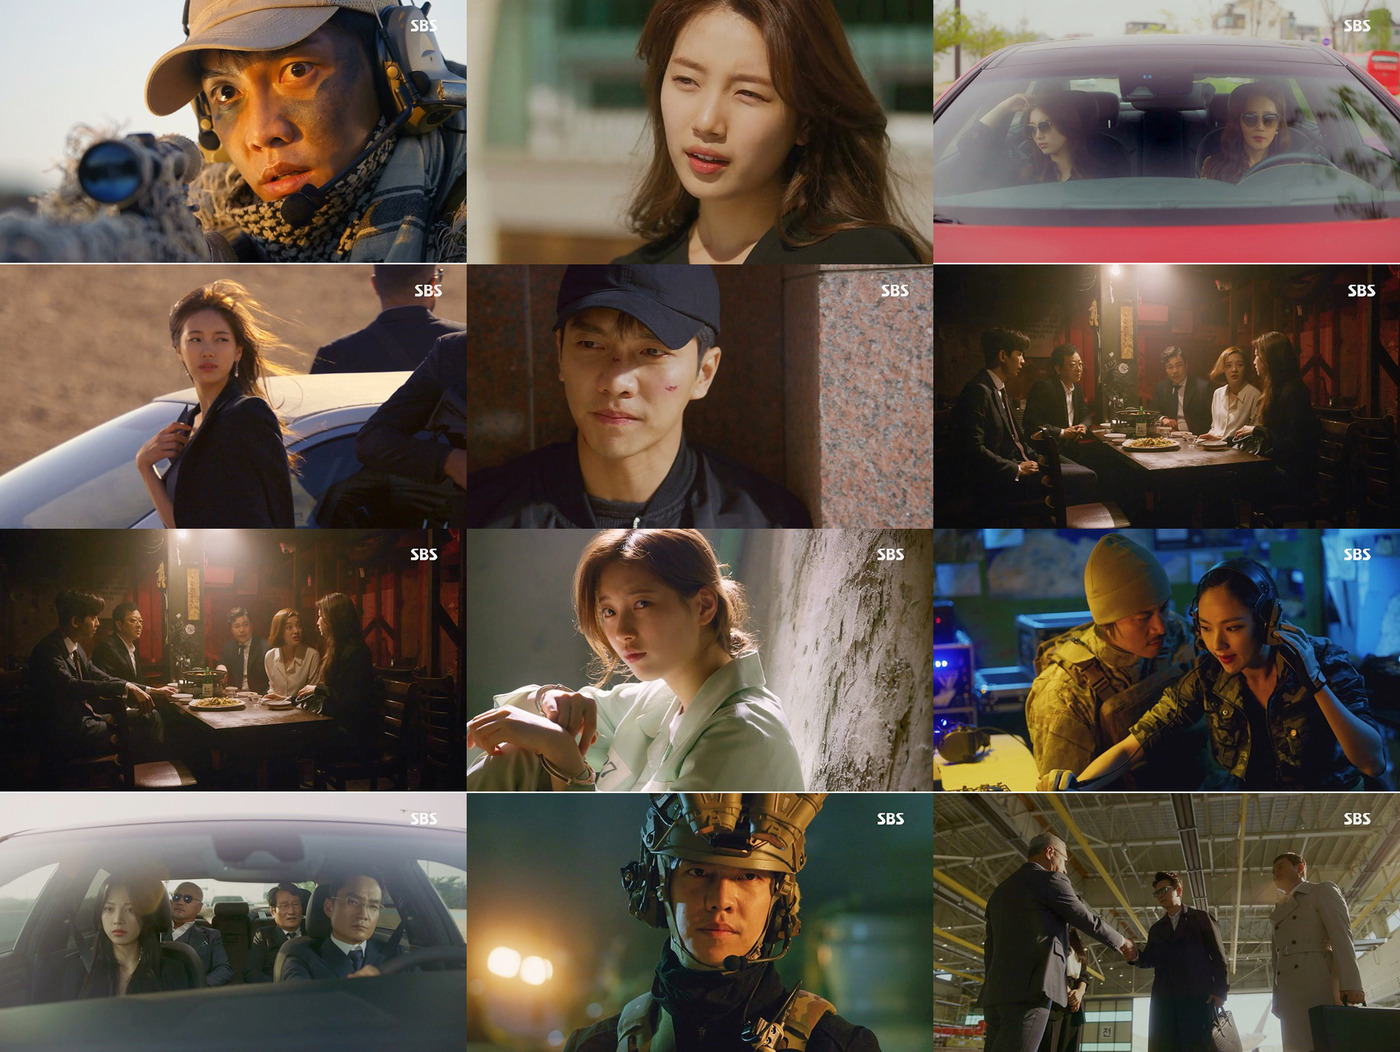 Seoul=) = Vagabond has revamped its own top TV viewer ratings, earning the beauty of its kind.According to Nielsen Korea, a TV viewer rating research company, the final episode of SBSs Golden Drama Vagabond (playplayplay by Jang Young-chul, Jung Kyung-soon/directed Yoo In-sik) was recorded in the first part with 11.7% (the same below the national standard) and 13.0% in the second part.This is higher than the previous broadcast (11.8%) and corresponds to the best TV viewer ratings of Drama itself.MBC No Twice was broadcast in the same time zone only 7.8% and 8.0%, while KBS 2TV Battle Trip was 3.3% and 2.7%.At the final episode of Vagabond, Cha Dal-gun (Lee Seung-gi), who had been almost burned by Edward Park (Lee Kyung-young), managed to save his life and became a mercenary at the end of twists and turns, and Bae Suzy, who believed Dalgun was in the world, became a lobbyist with the help of Jessica Lee (Moon Jung-hee) The contents were drawn in detail.At the end of the play, Dalgan, who was waiting in the desert of Kiria, was shocked to know that Harry was the target he had to shoot.Soon another mercenary tried to shoot him, and in a moment he pulled the trigger at the mercenary.Especially, this screen, which attracted great attention as it was drawn in the first screen, was released so that it was able to solve the curiosity of viewers.Vagabond, which was first broadcast on September 20th, attracted the attention of viewers as Kahaani was swept in earnest, starting with the screen where the B357 planes to Morocco fell.From this point on, detailed yet solid production, visual beauty, and both the week and supporting actors, including Lee Seung-gi and Bae Suzy, showed off their ability to act without water.Since then, Cha Dal-gun (Lee Seung-gi), who lost his nephew Cha Hoon (Moon Woo-jin), and Kahaani, who is in a reversal and stinging a hurdle, have been developed with inhalation while the NIS agent, Bae Suzy, is working together to find out the truth of the incident.In addition to Seoul and Incheon, spectacular scenes such as shooting and chases between Morocco, Portugal and Lisbon also gave more fun as they were immersed.Subsequently, from December 13, Stobrig will be broadcast on Stobrig, Stobrig, starring Nam Jung Min and Park Eun Bin.